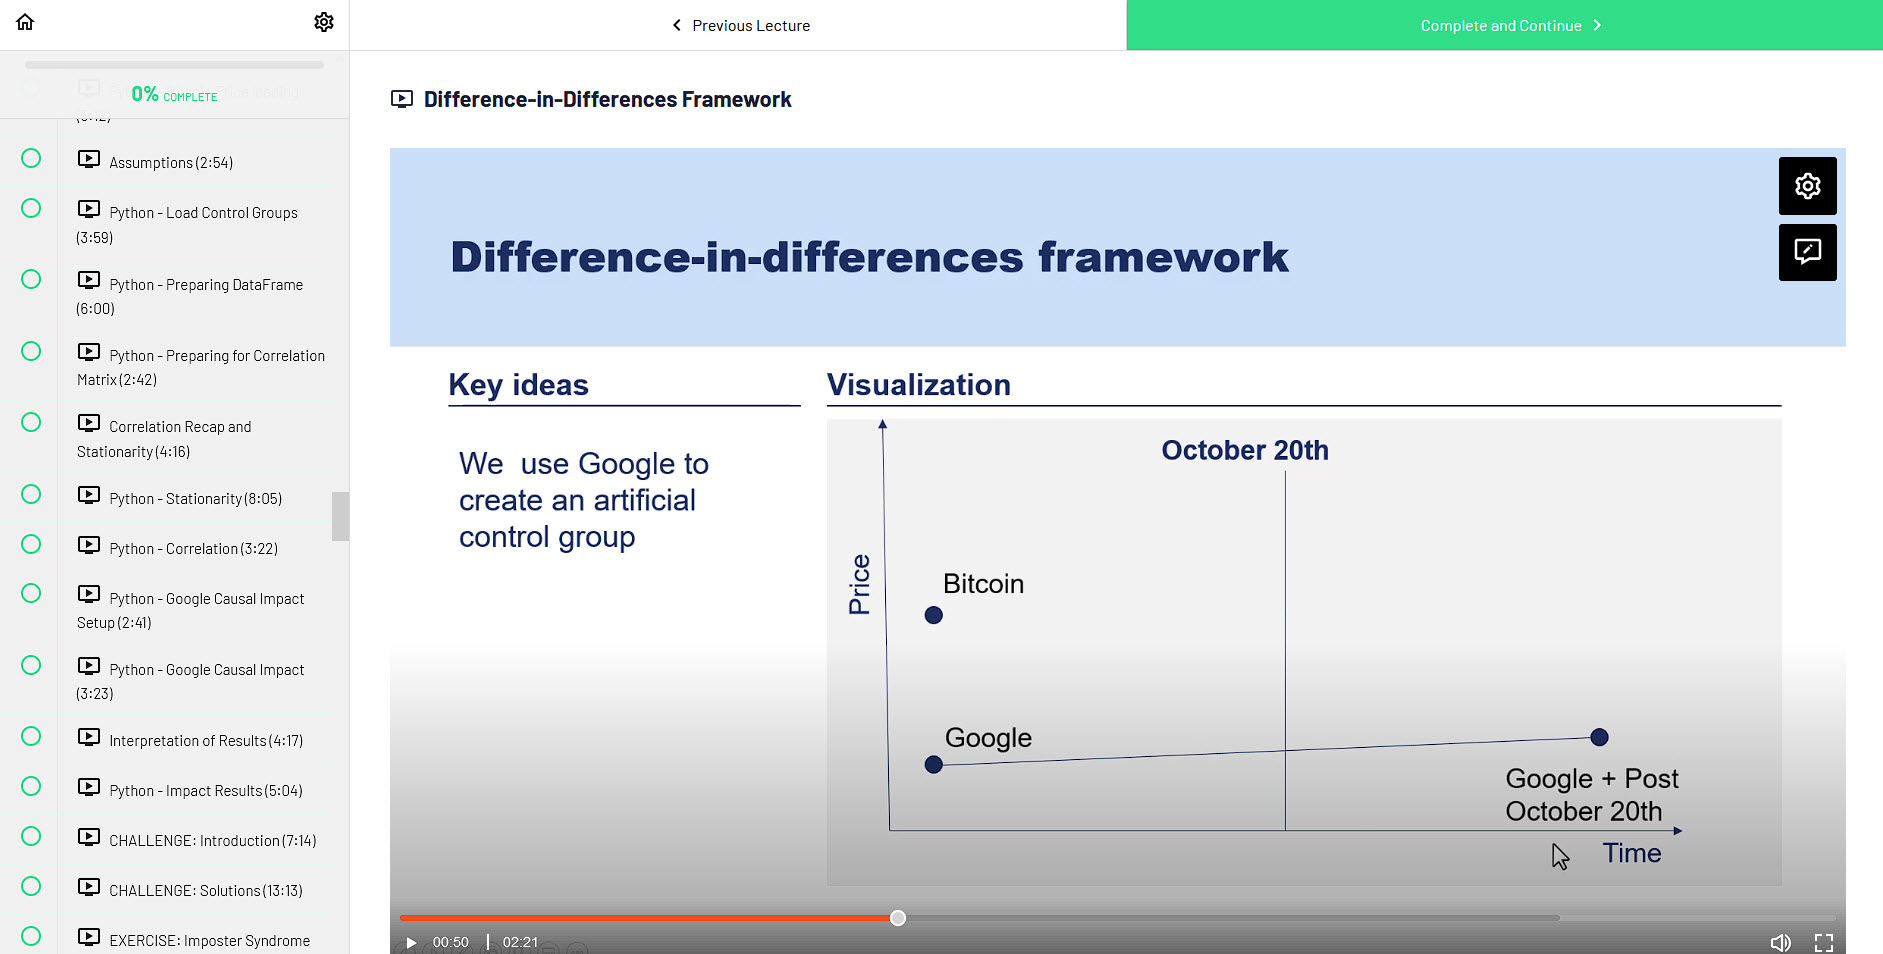 Learn the difference in diferences framework